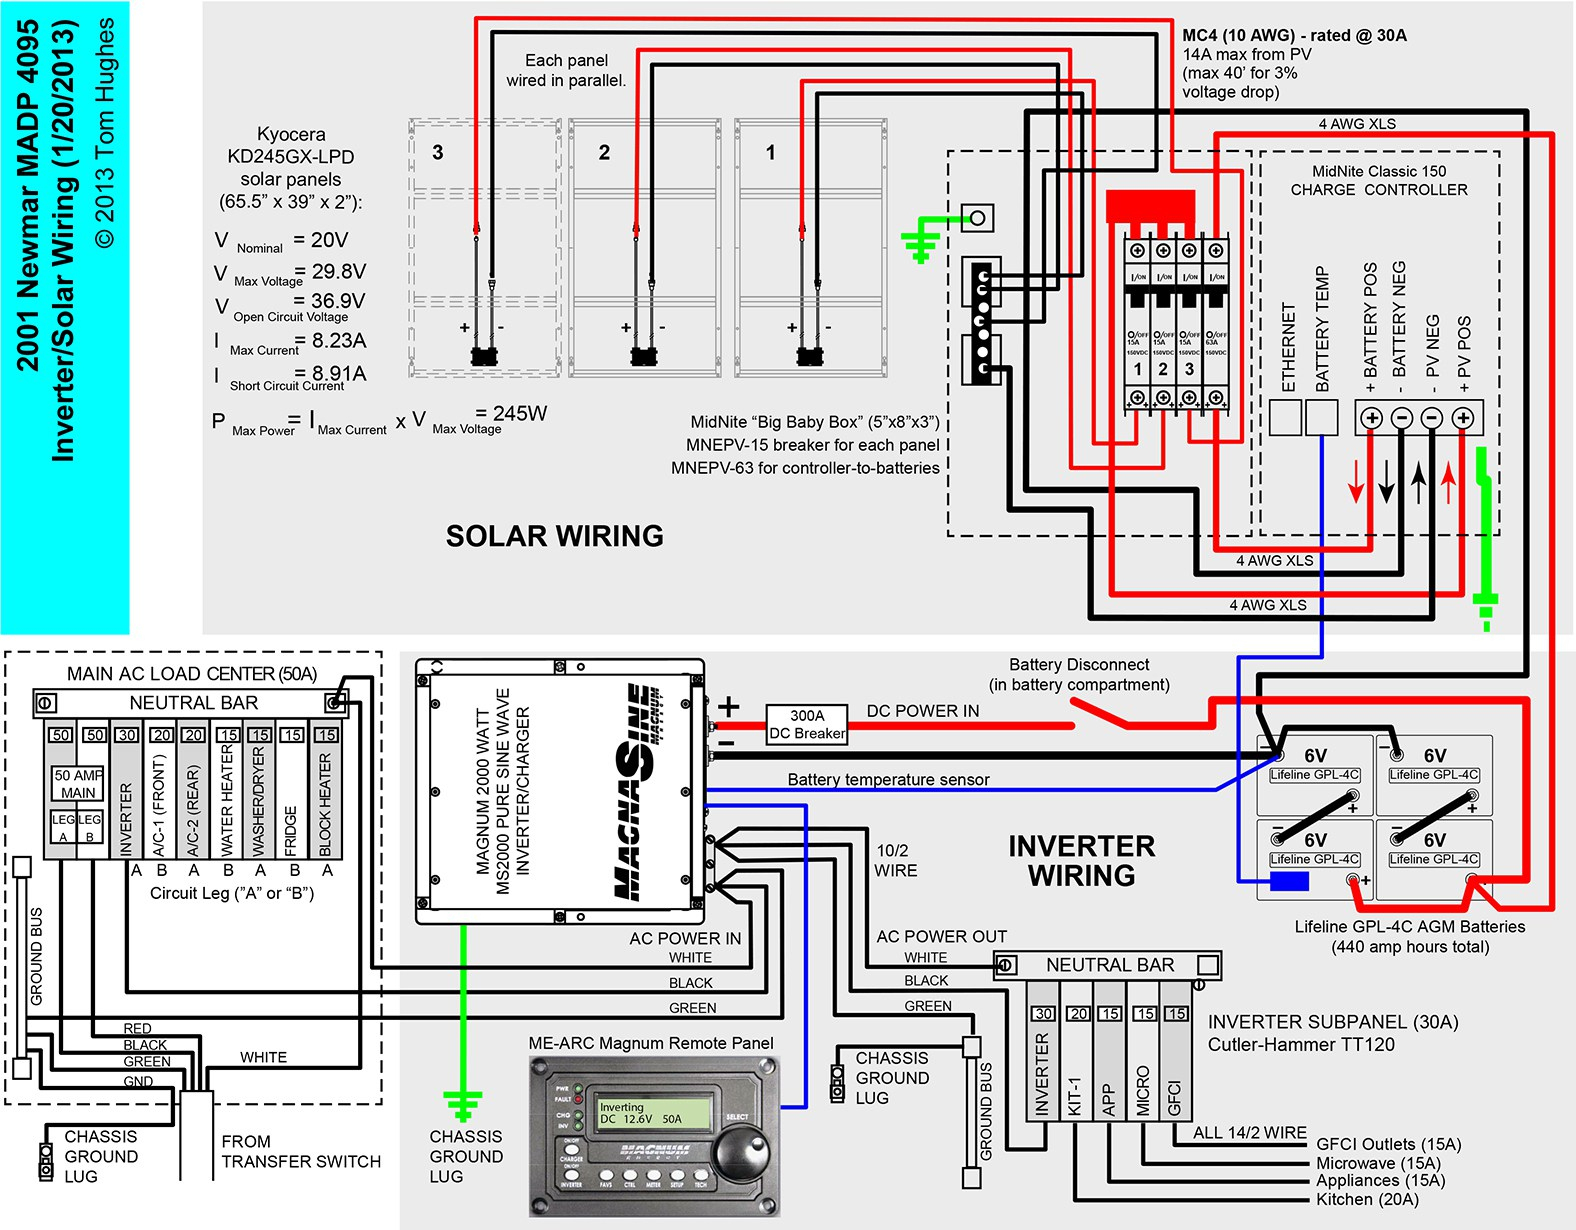 Typical Rv Electrical Wiring Diagram | Wiring Diagram - Rv Electrical Wiring Diagram